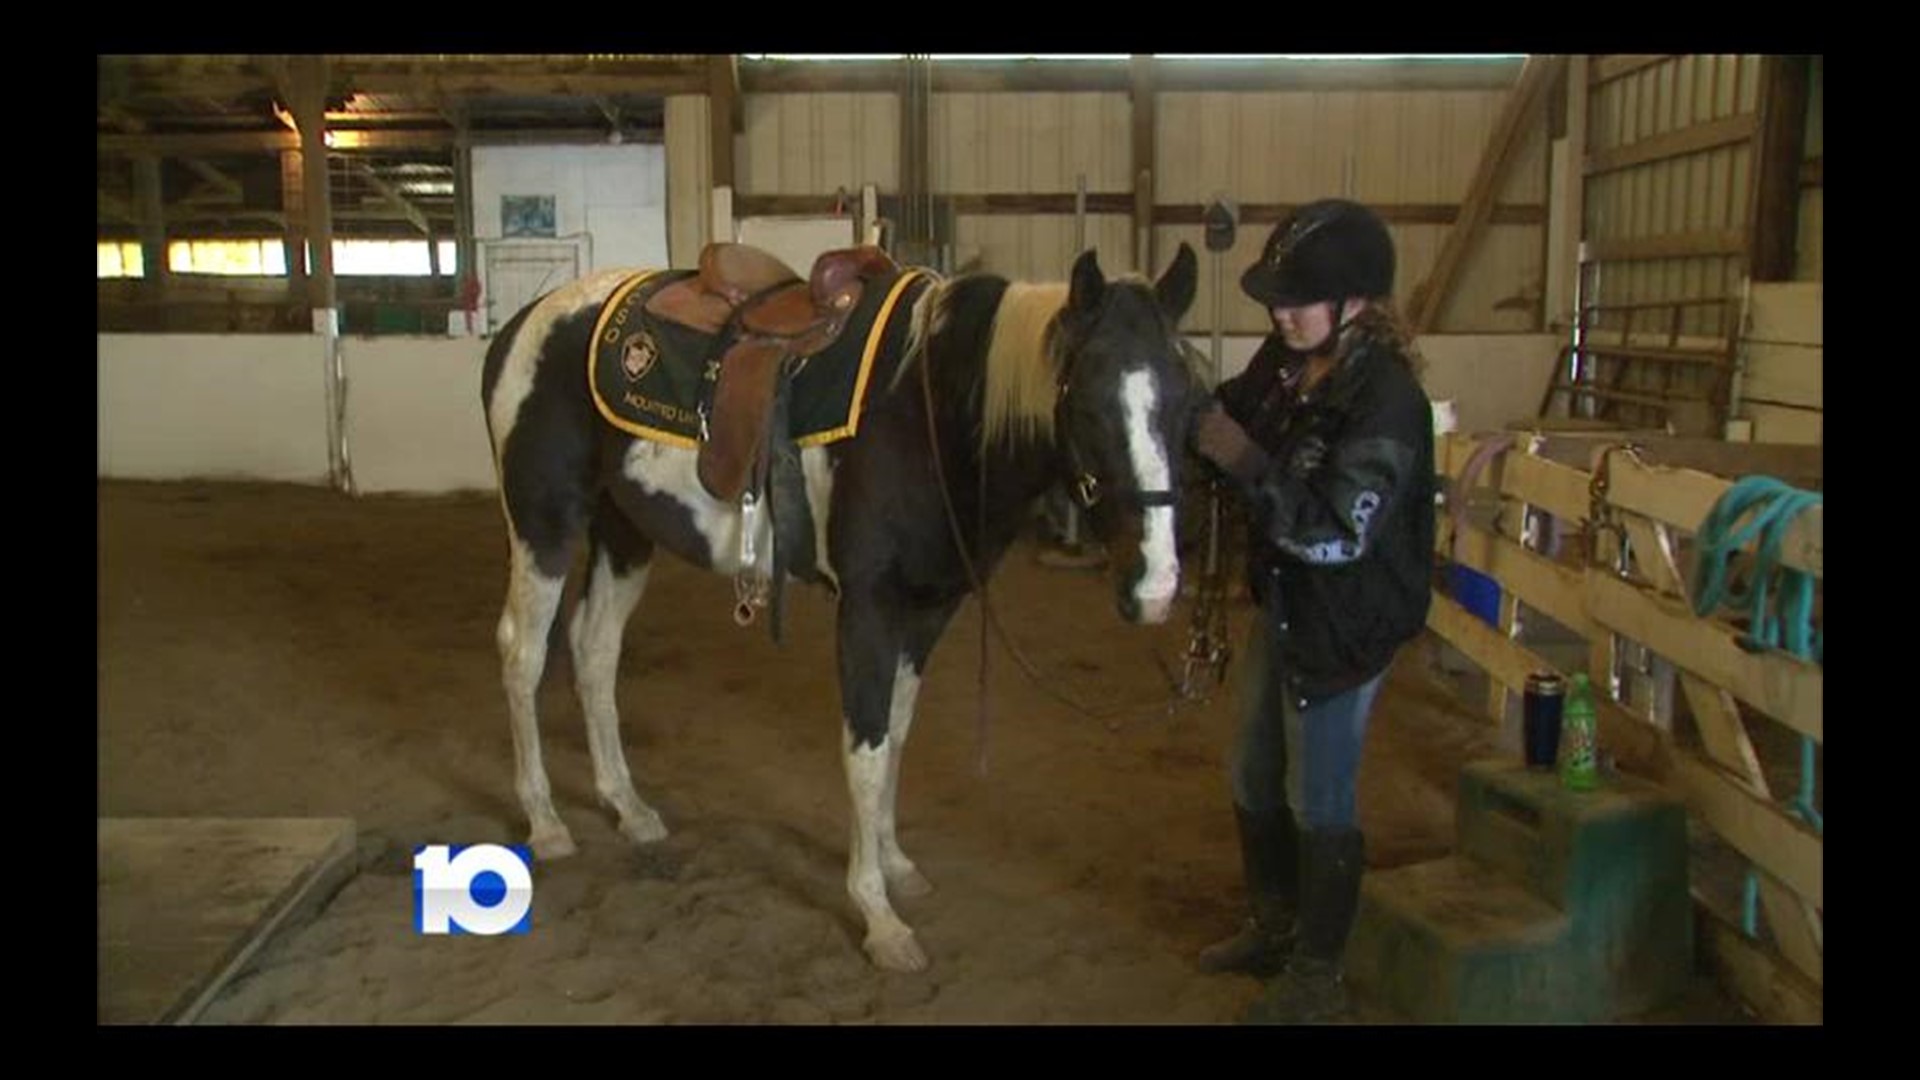 Newest Member Of Franklin County Sheriff’s Mounted Patrol Unit Saved By Corporal After Being Abused